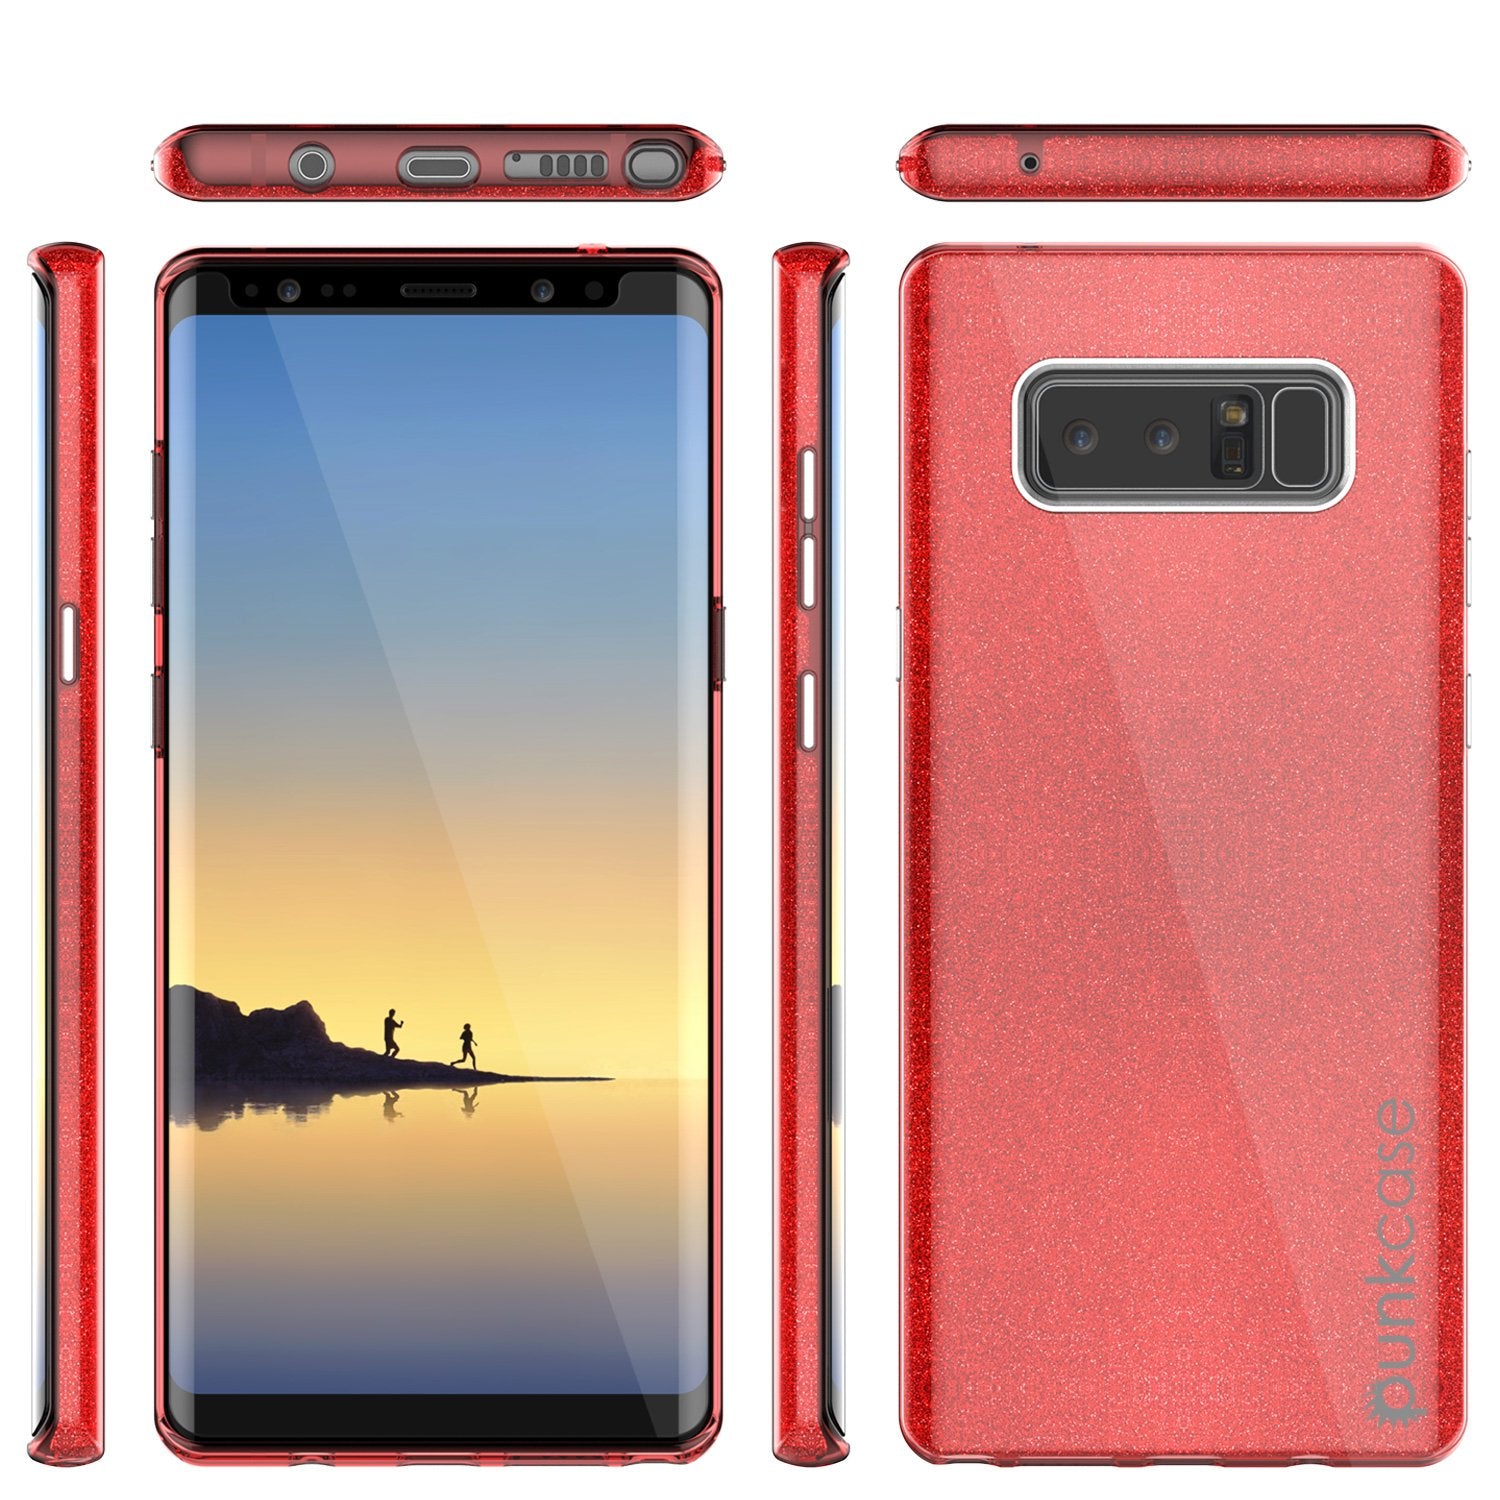 Galaxy Note 8 Case, Punkcase Galactic 2.0 Series Ultra Slim Protective Armor [Red]